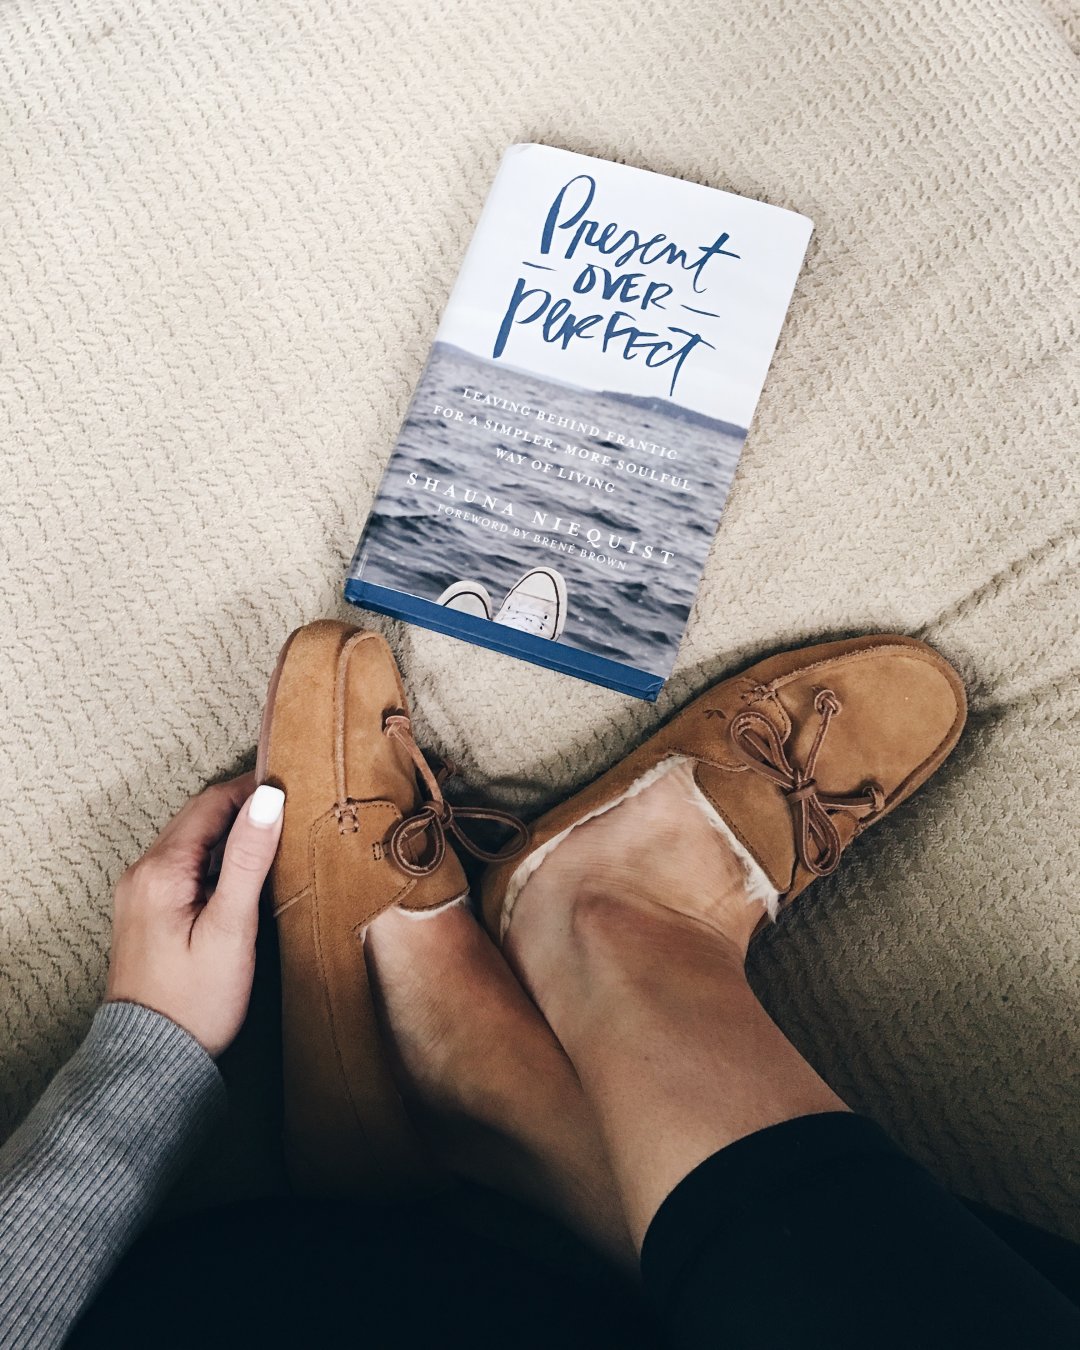 ways to embrace fall this season, cozying up with a good book present over perfect